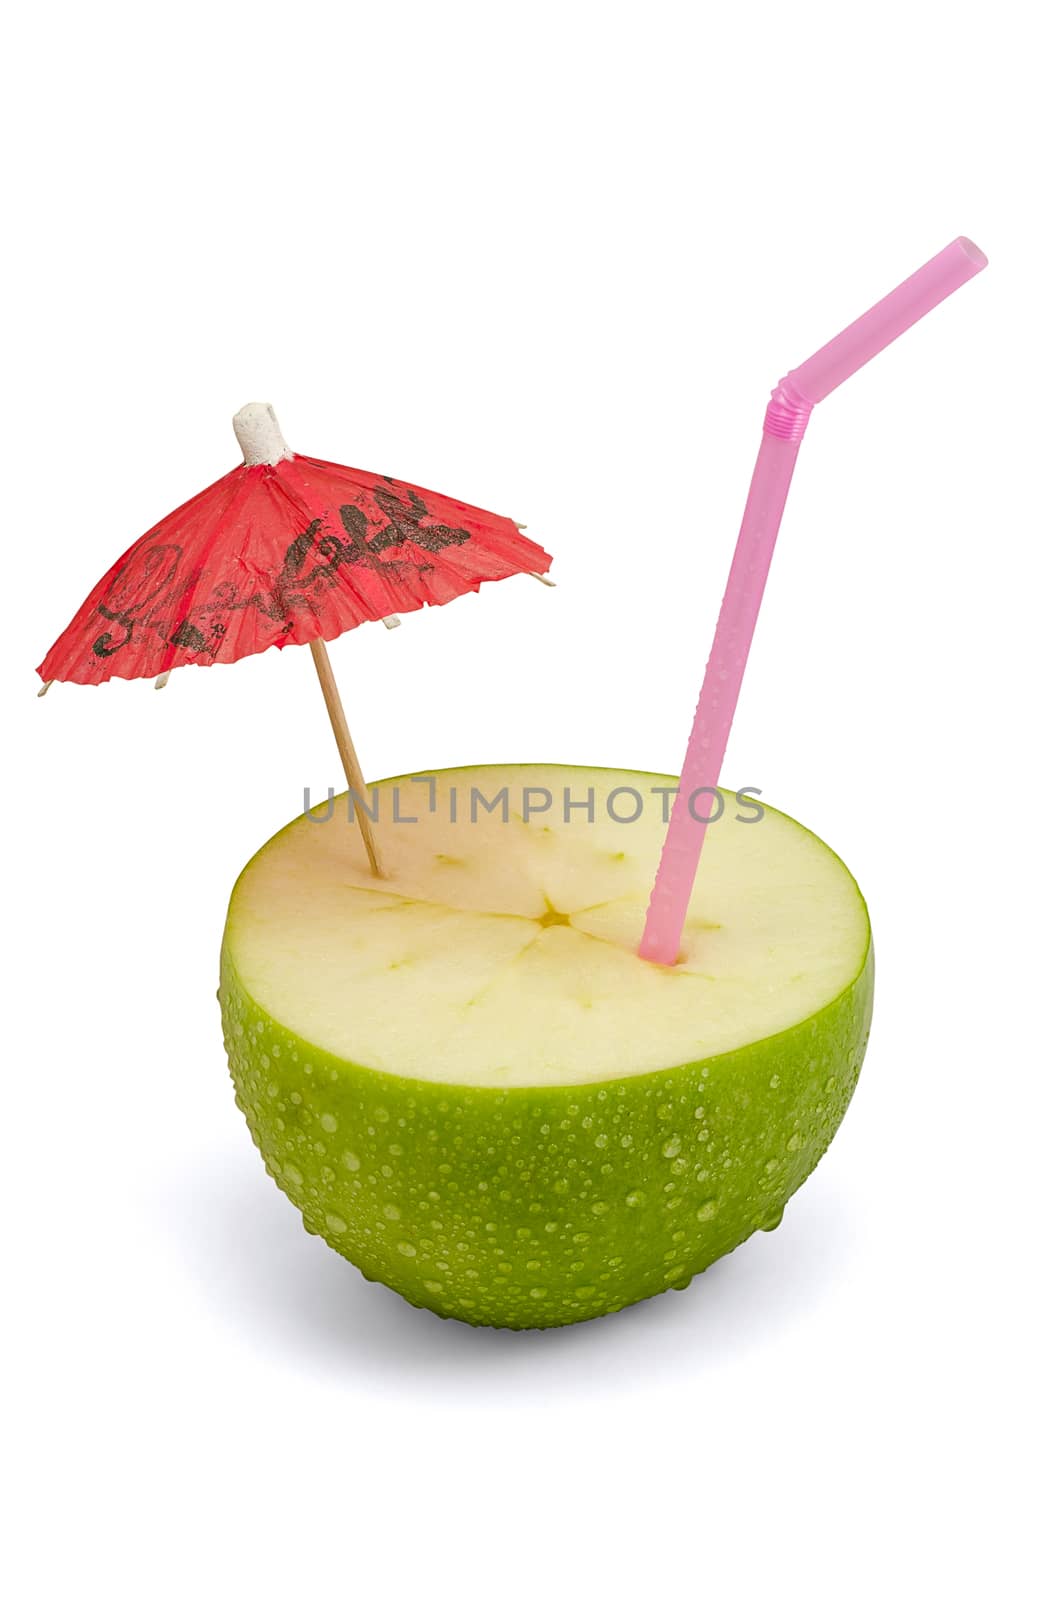 Close-up of green apple with a straw and umbrella, isolated on white